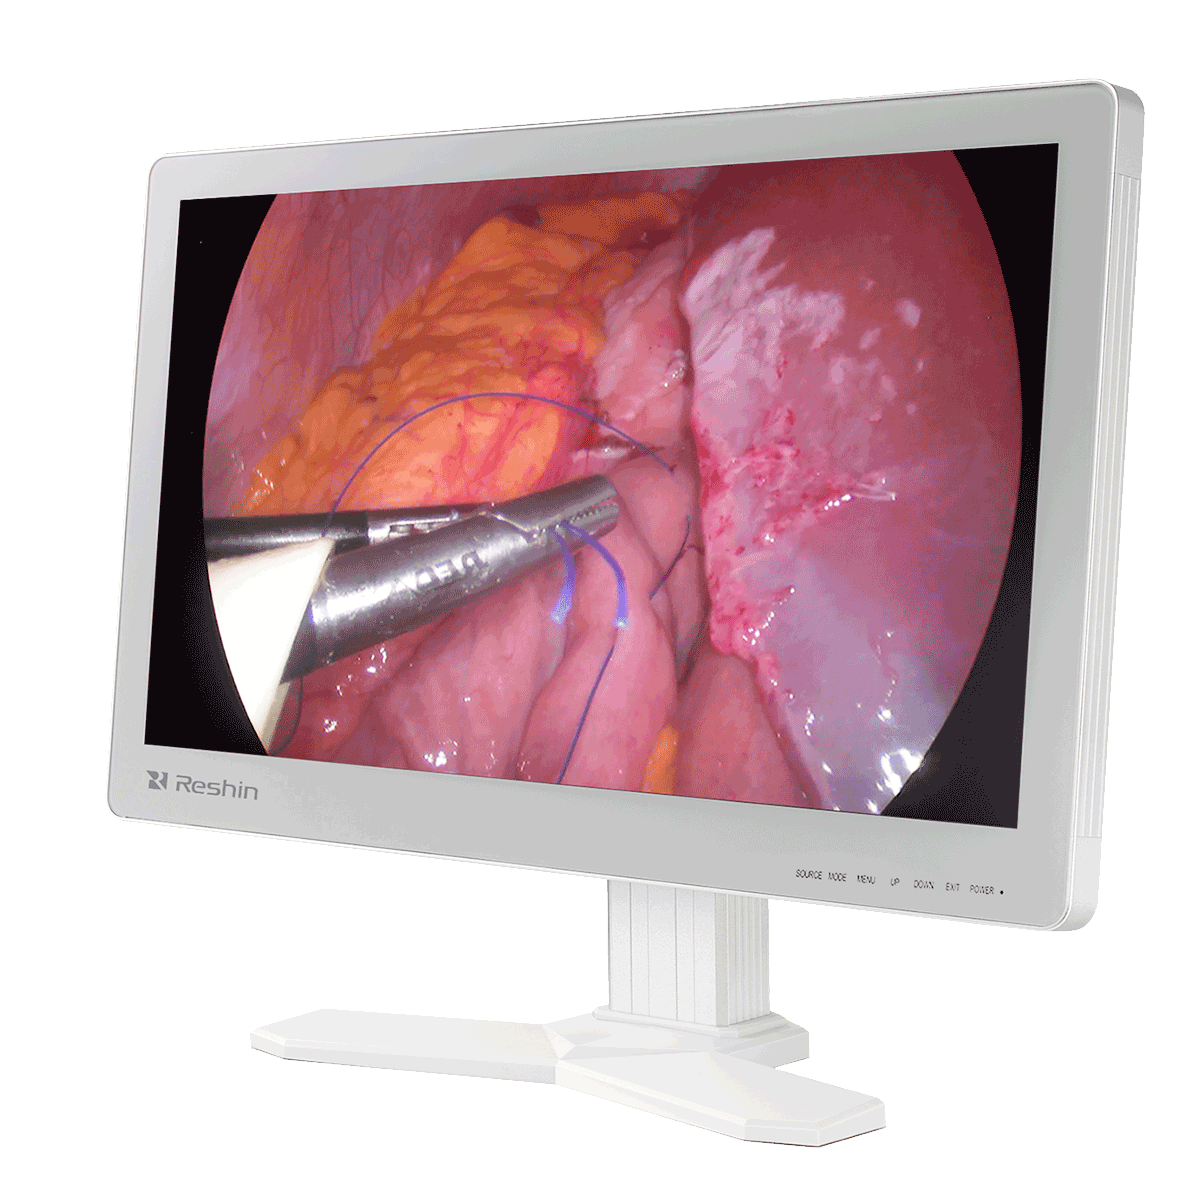 JLD ms241sp operating room monitor with anti-fingerprint glass, 23.6 inch